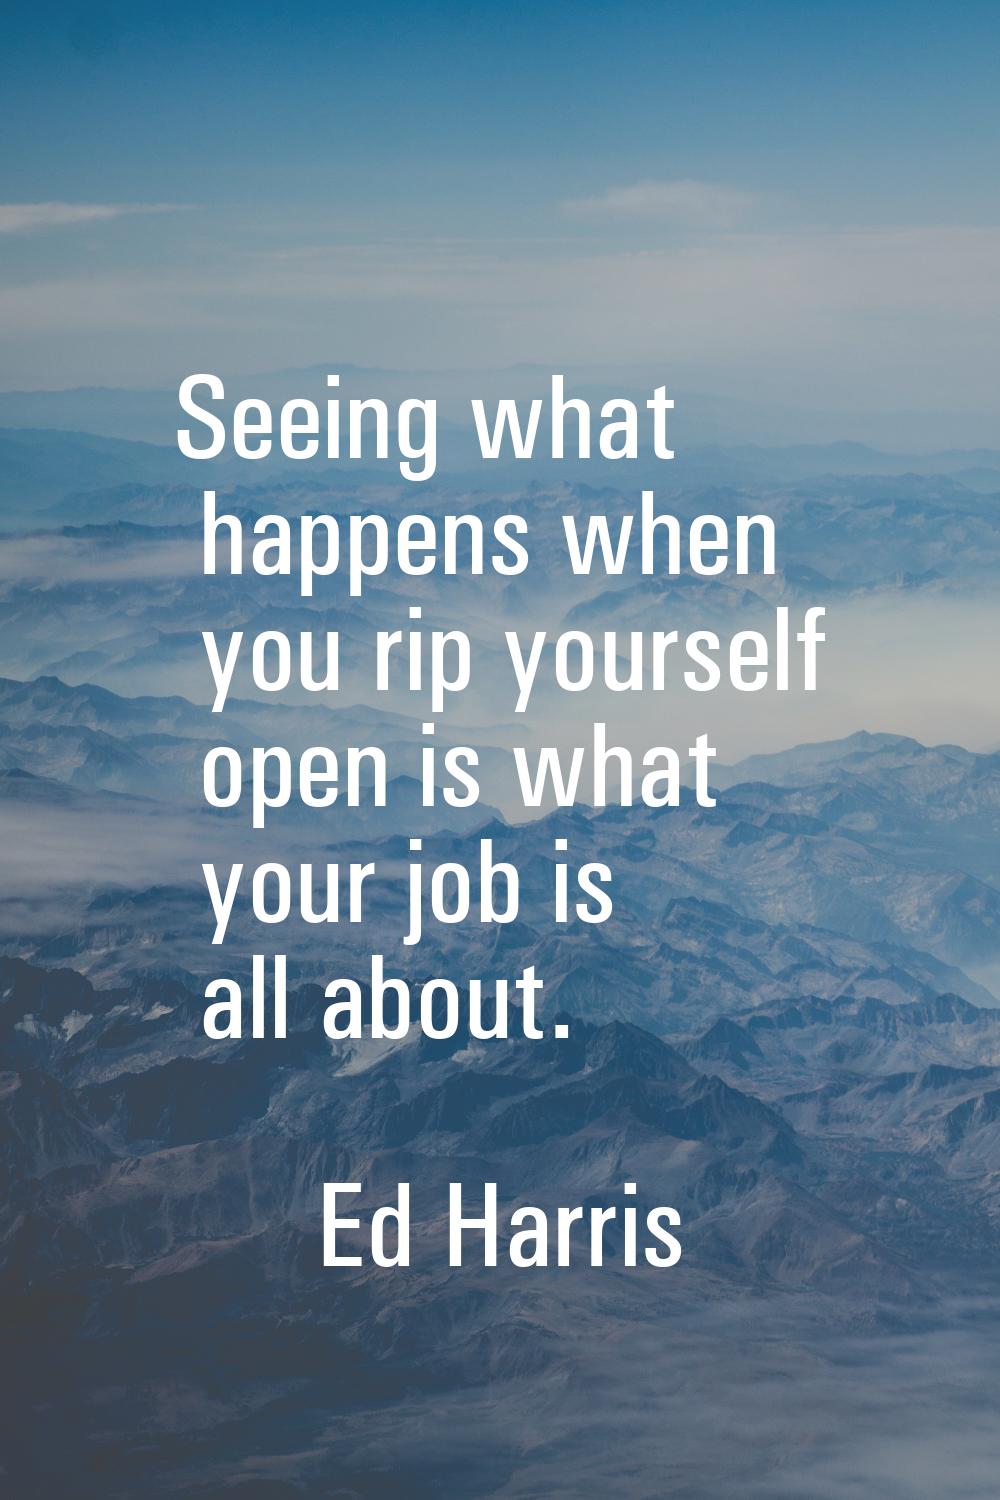 Seeing what happens when you rip yourself open is what your job is all about.